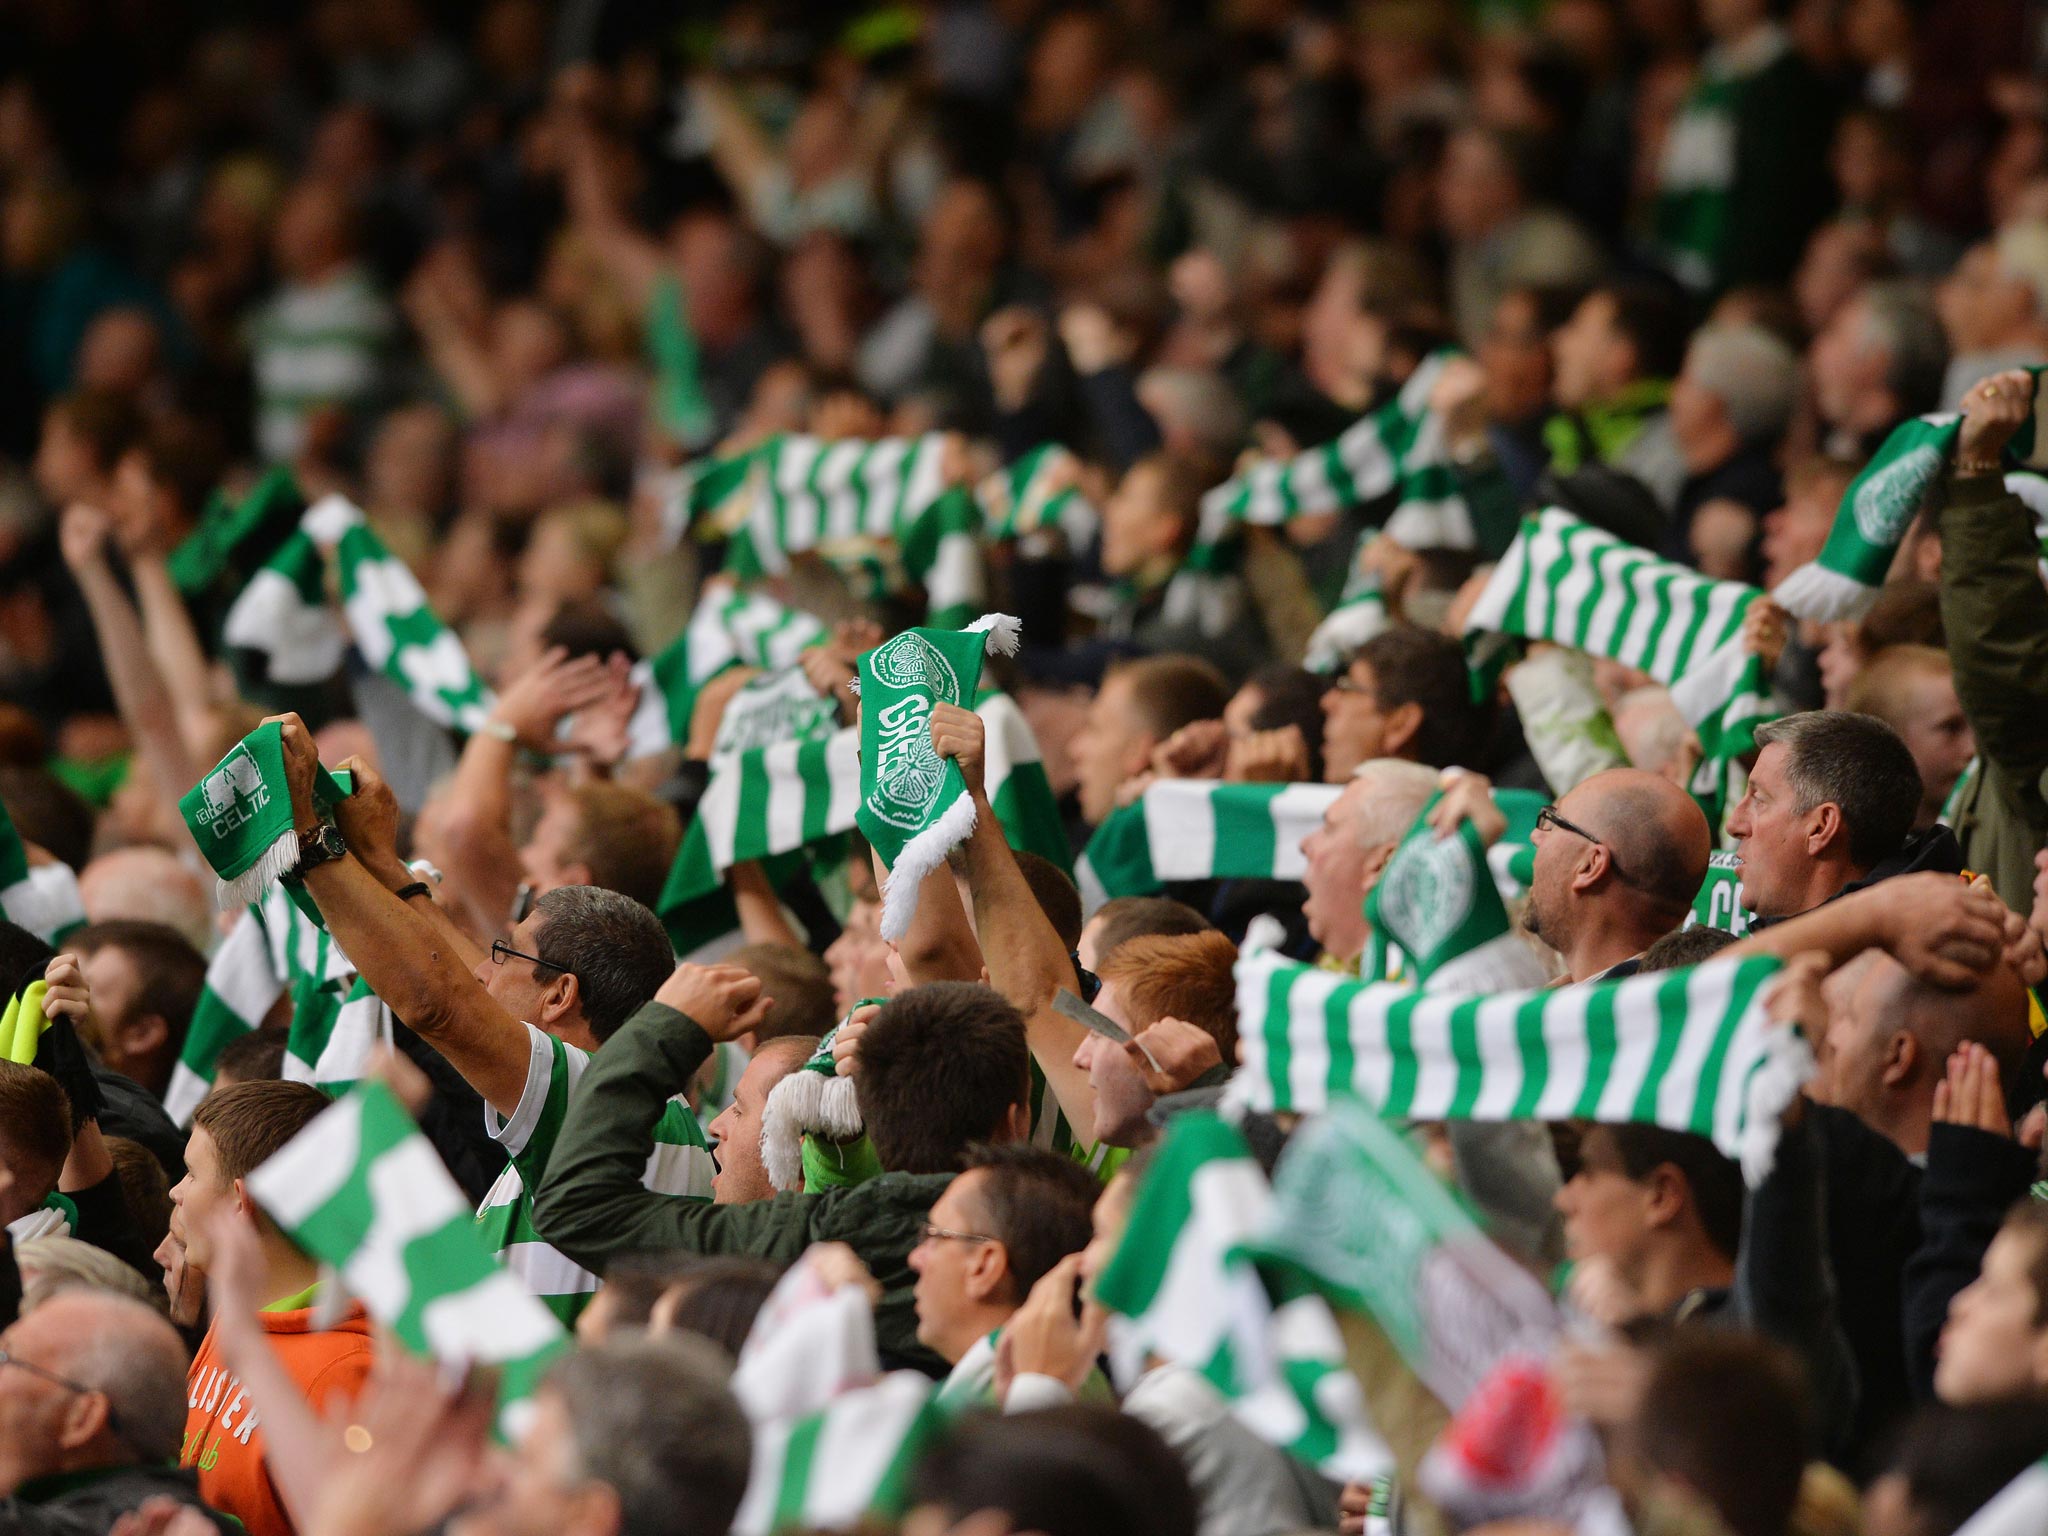 The song entered the charts after a campaign by Celtic fans